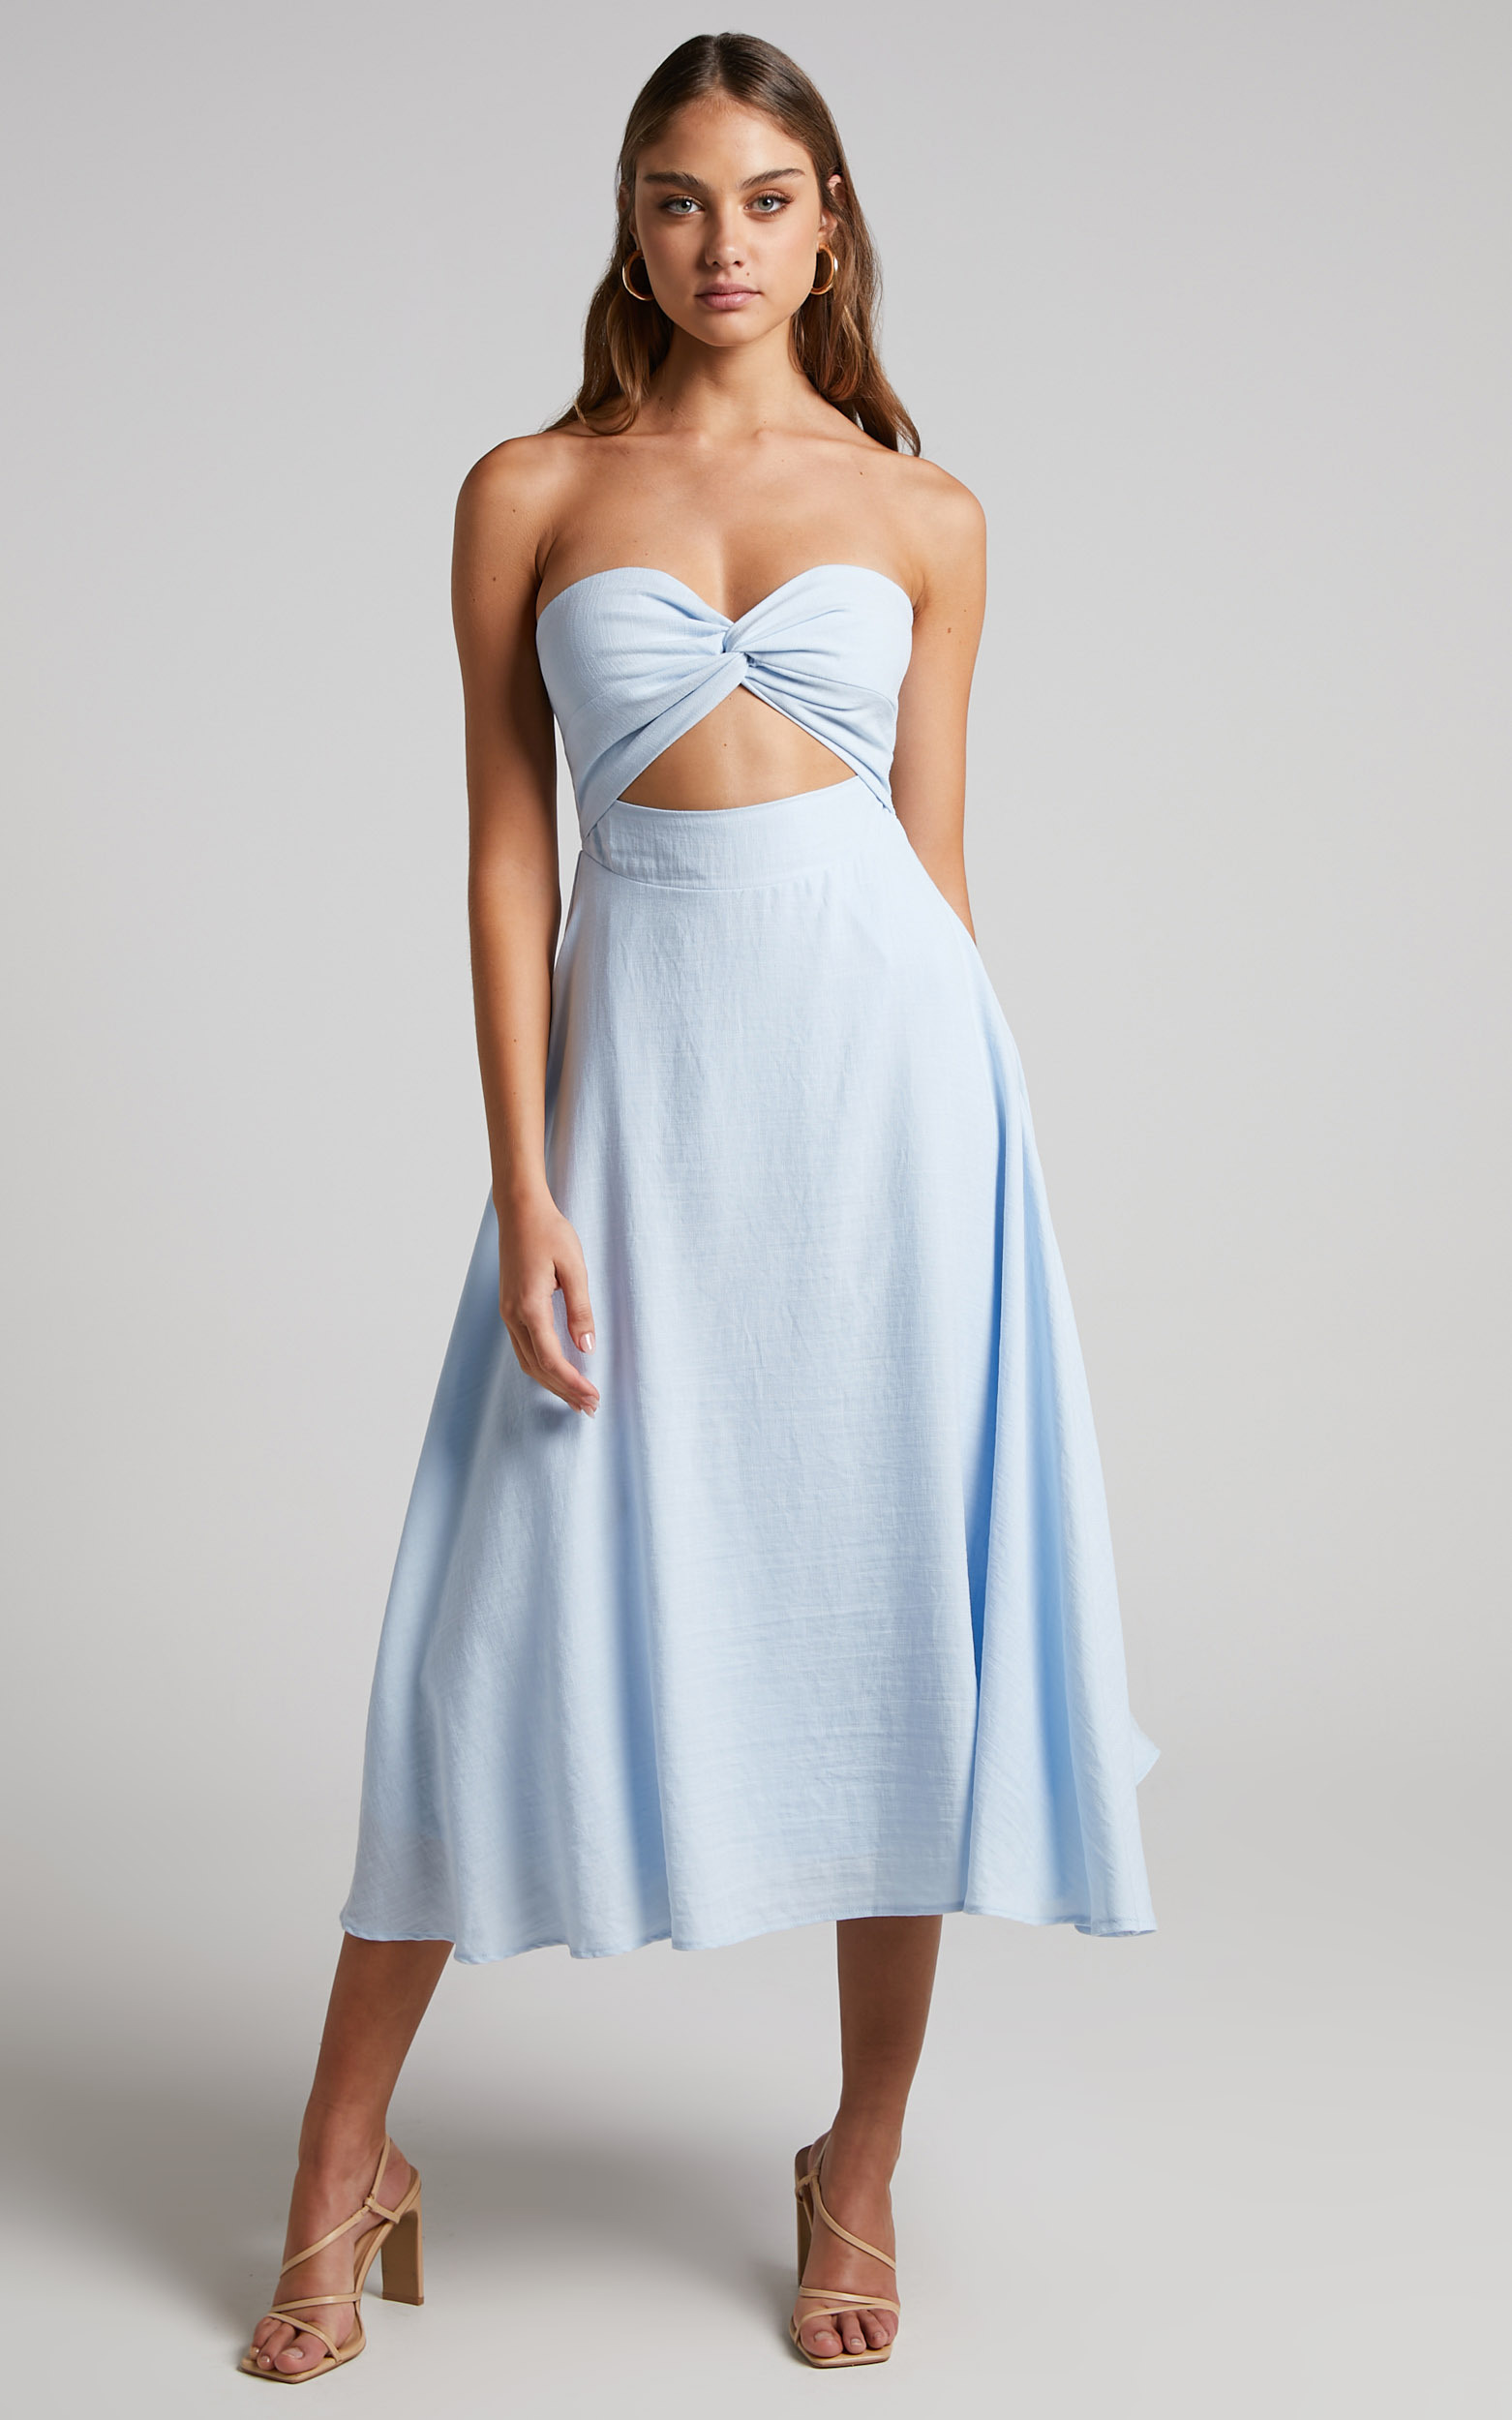 Avie Twist Strapless Cocktail Dress in Ice Blue - 06, BLU2, hi-res image number null